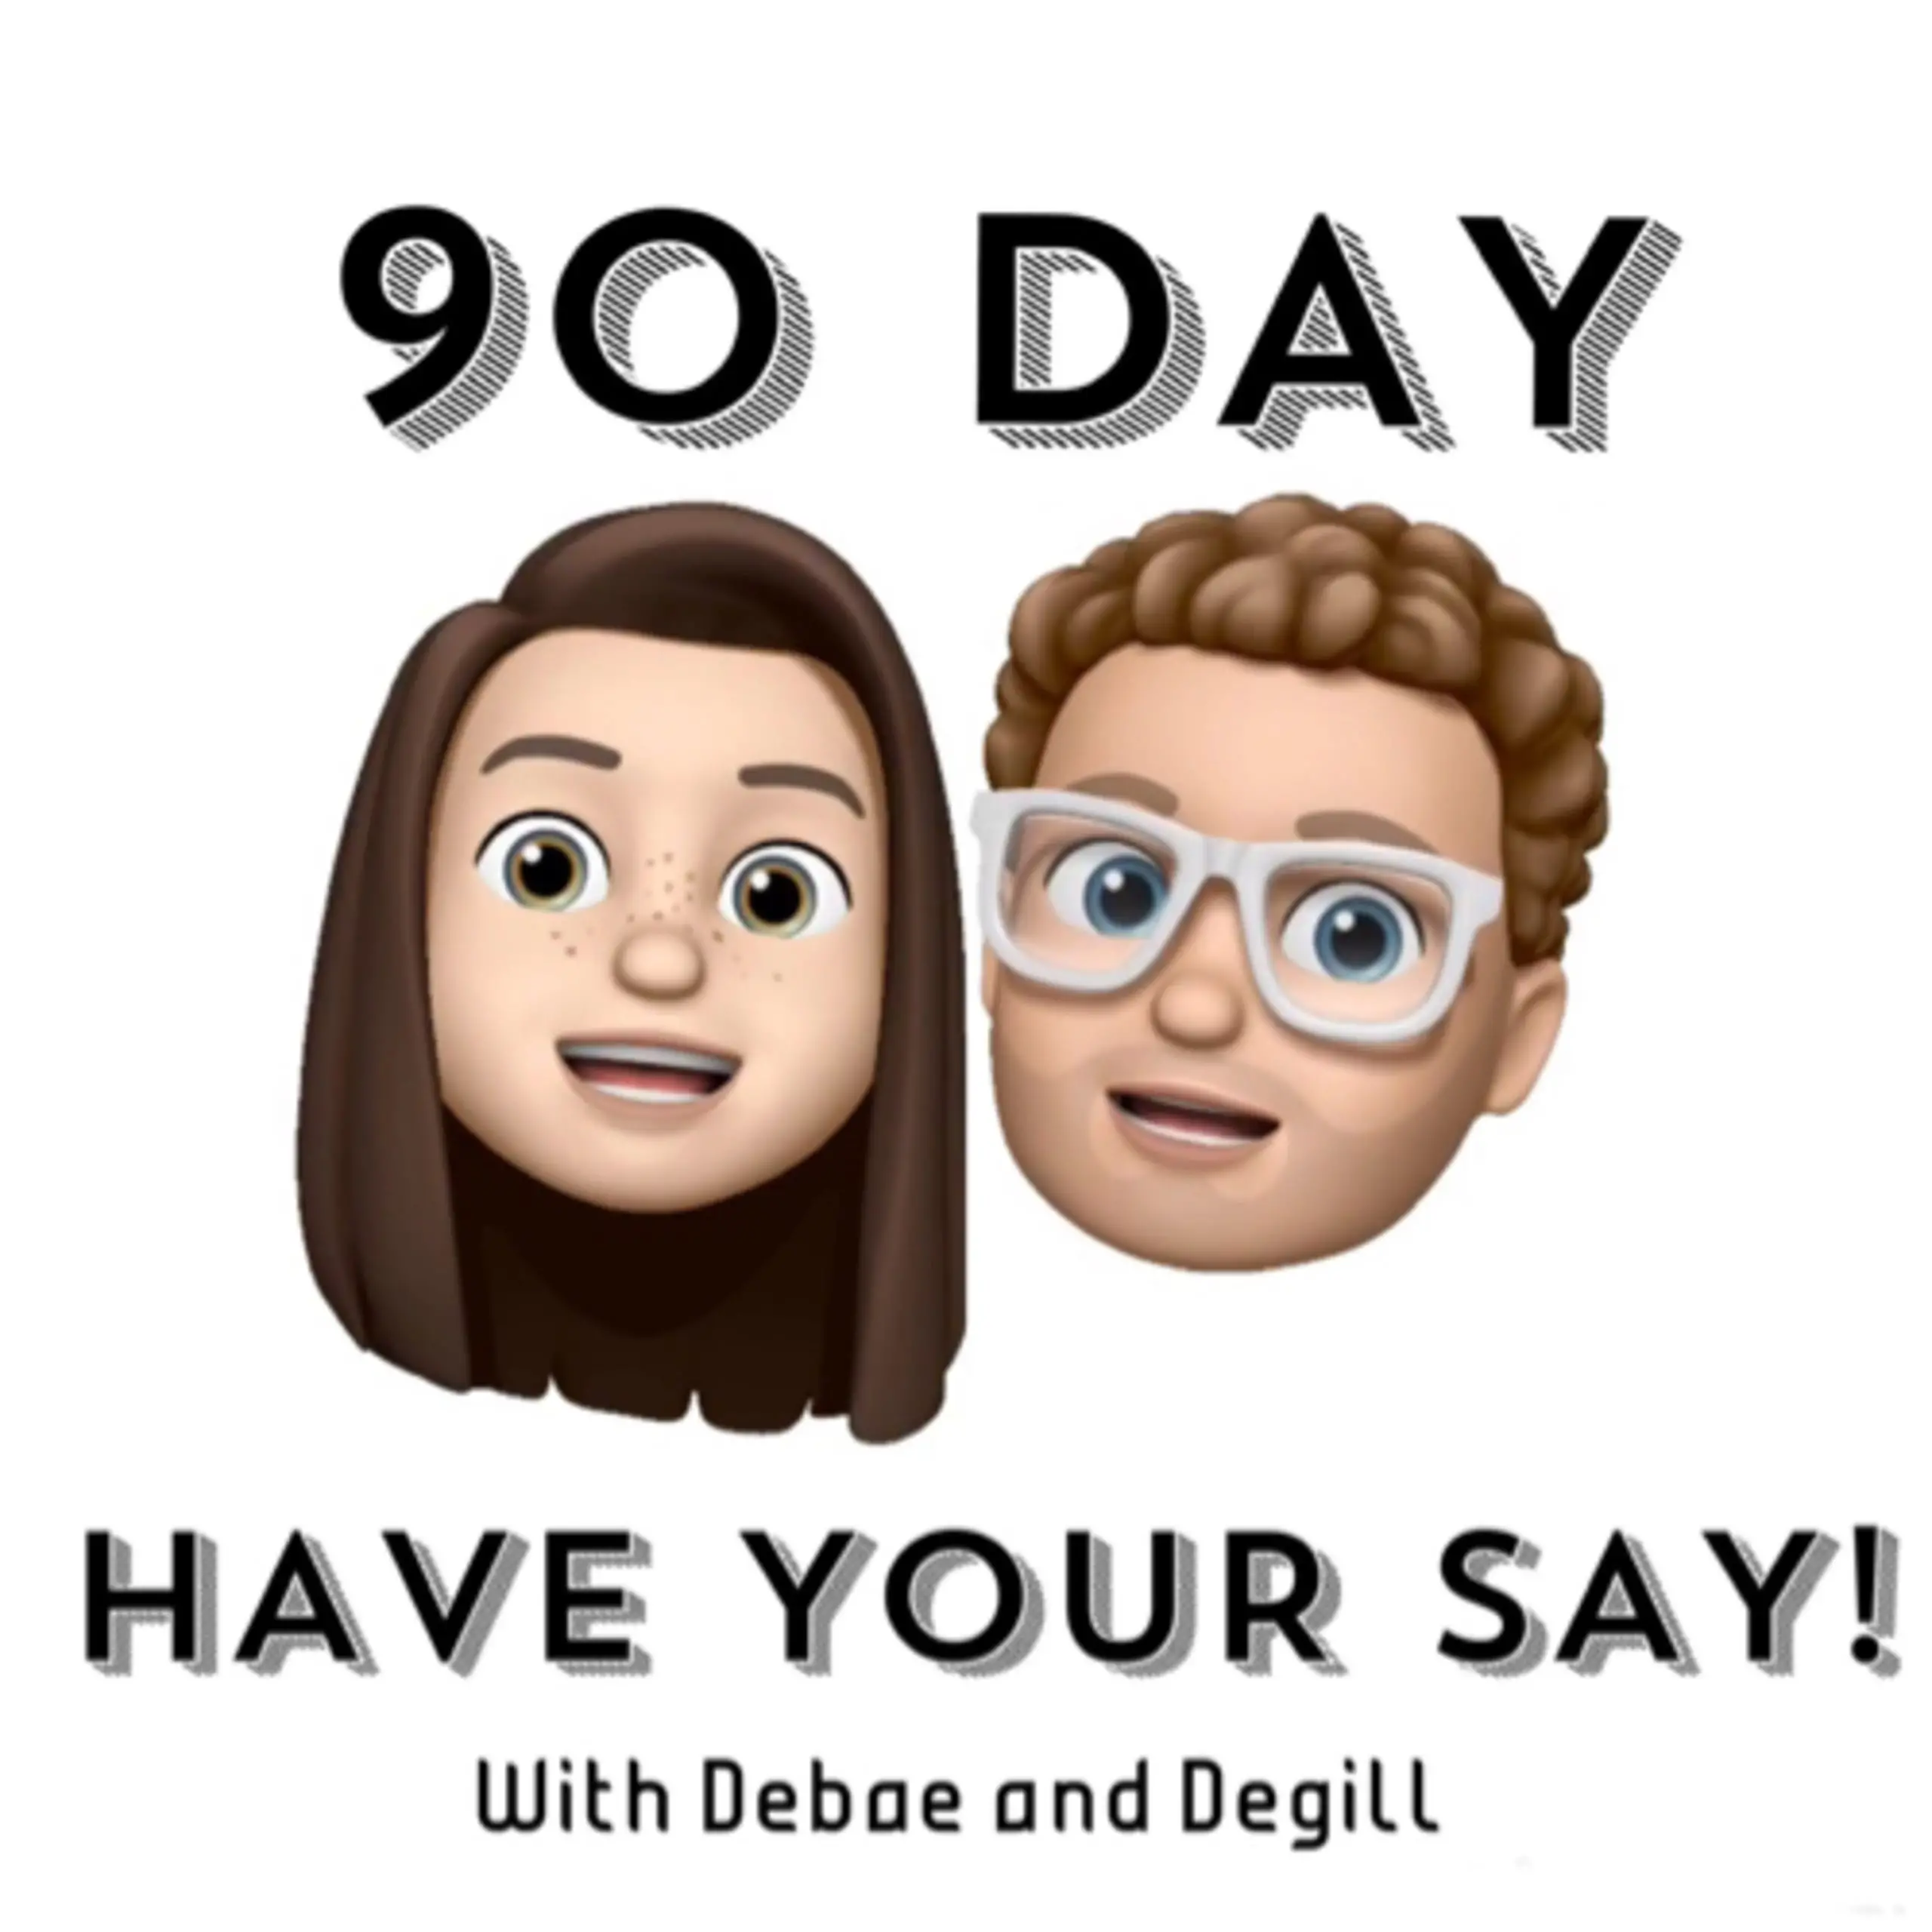 90 DAY HAVE YOUR SAY! 90 Day Fiancé The Other Way, The Family Chantal ...